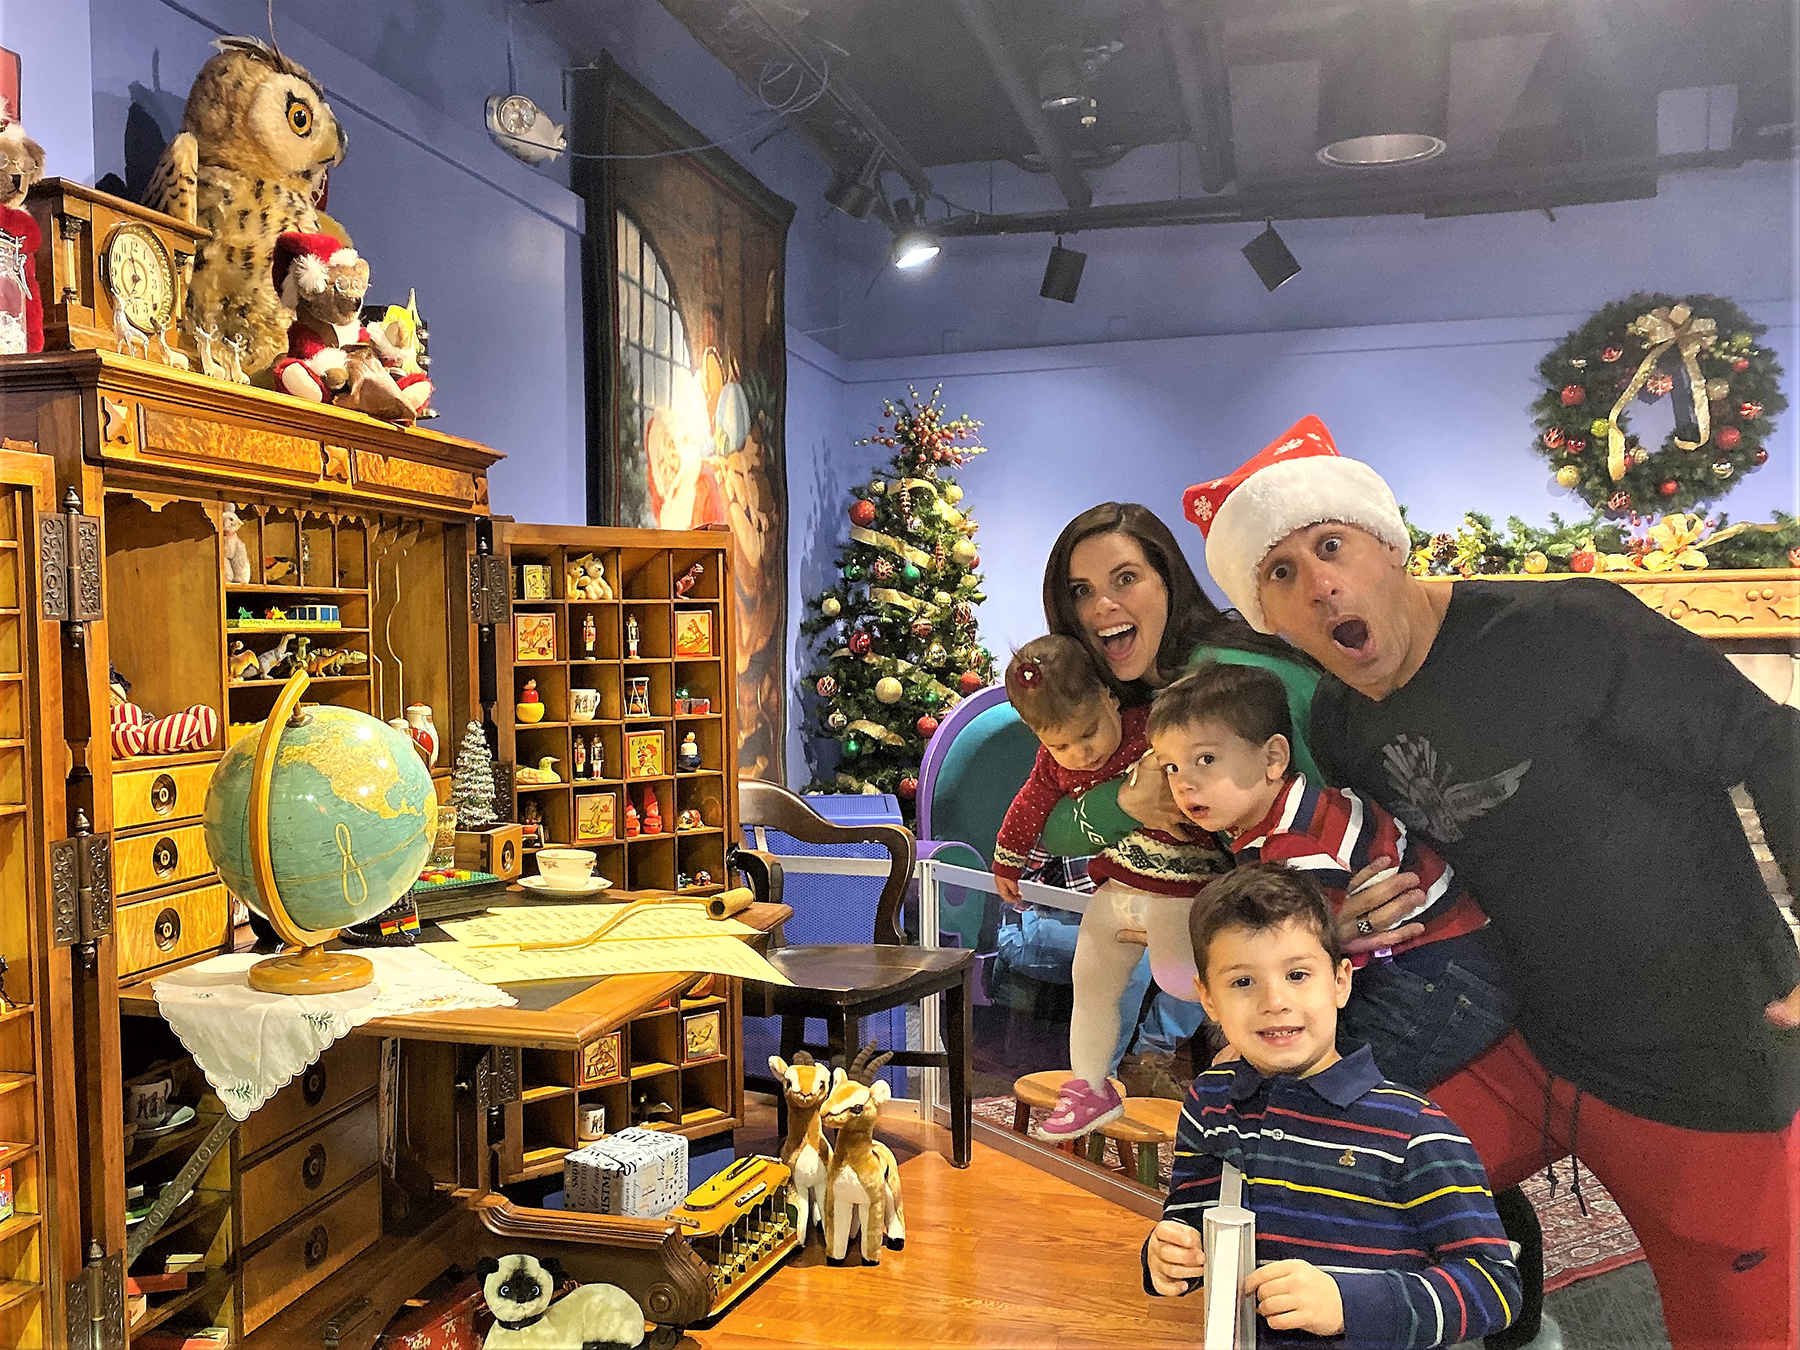 IndyCar driver Tony Kanaan and family find out who is on Santa's Naughty and Nice list at The Children's Museum of Indianapolis.